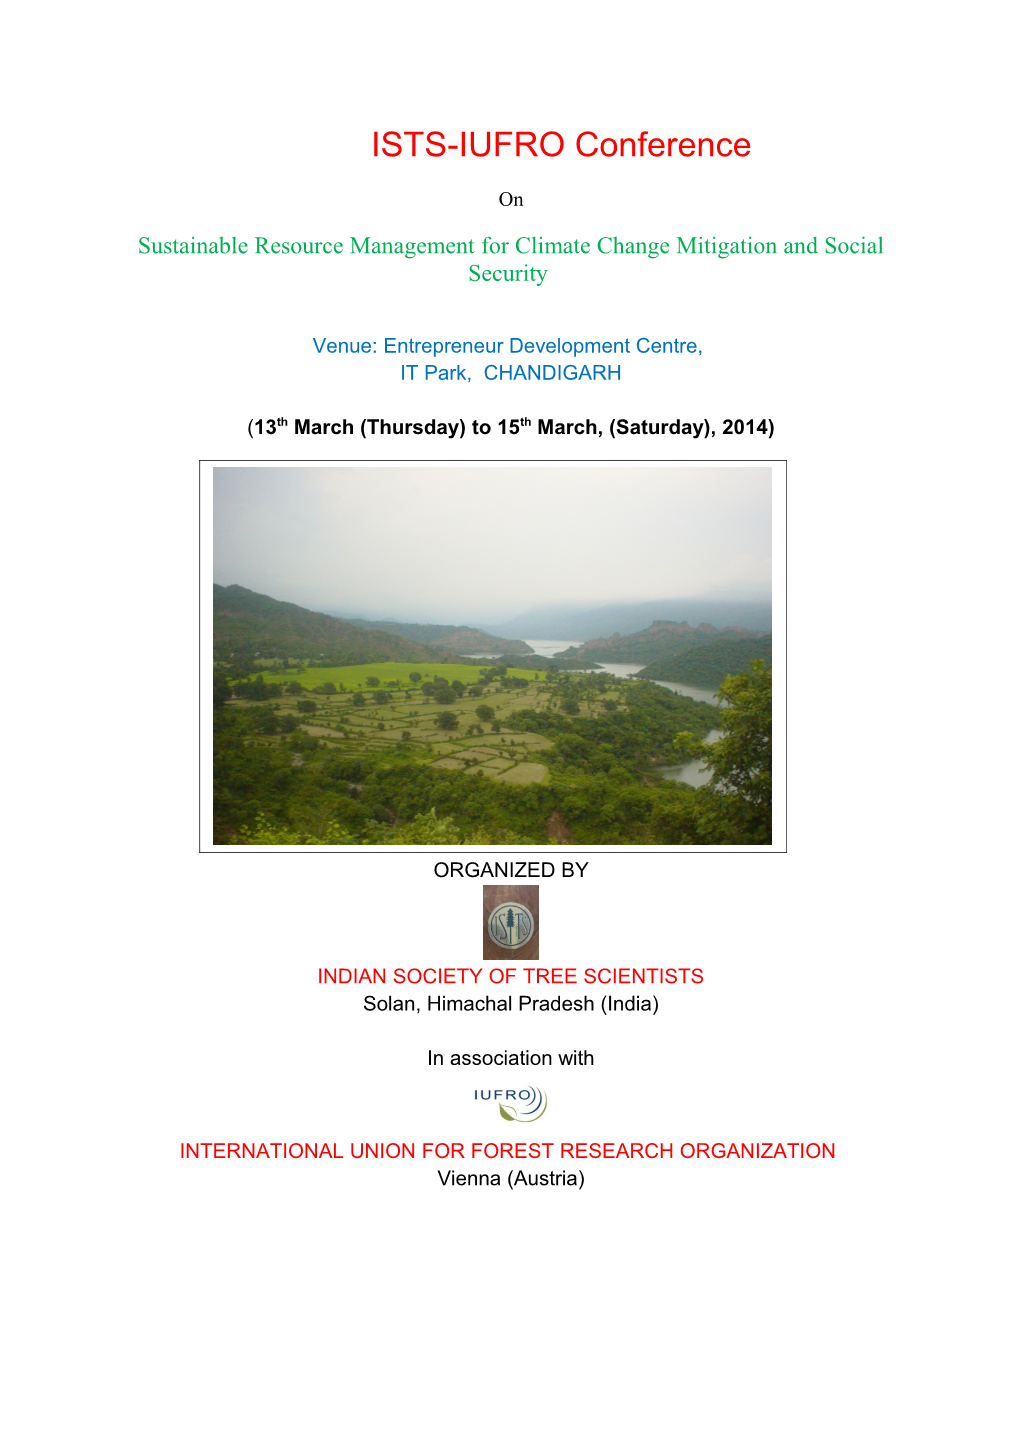 Sustainable Resource Management for Climate Change Mitigation and Social Security